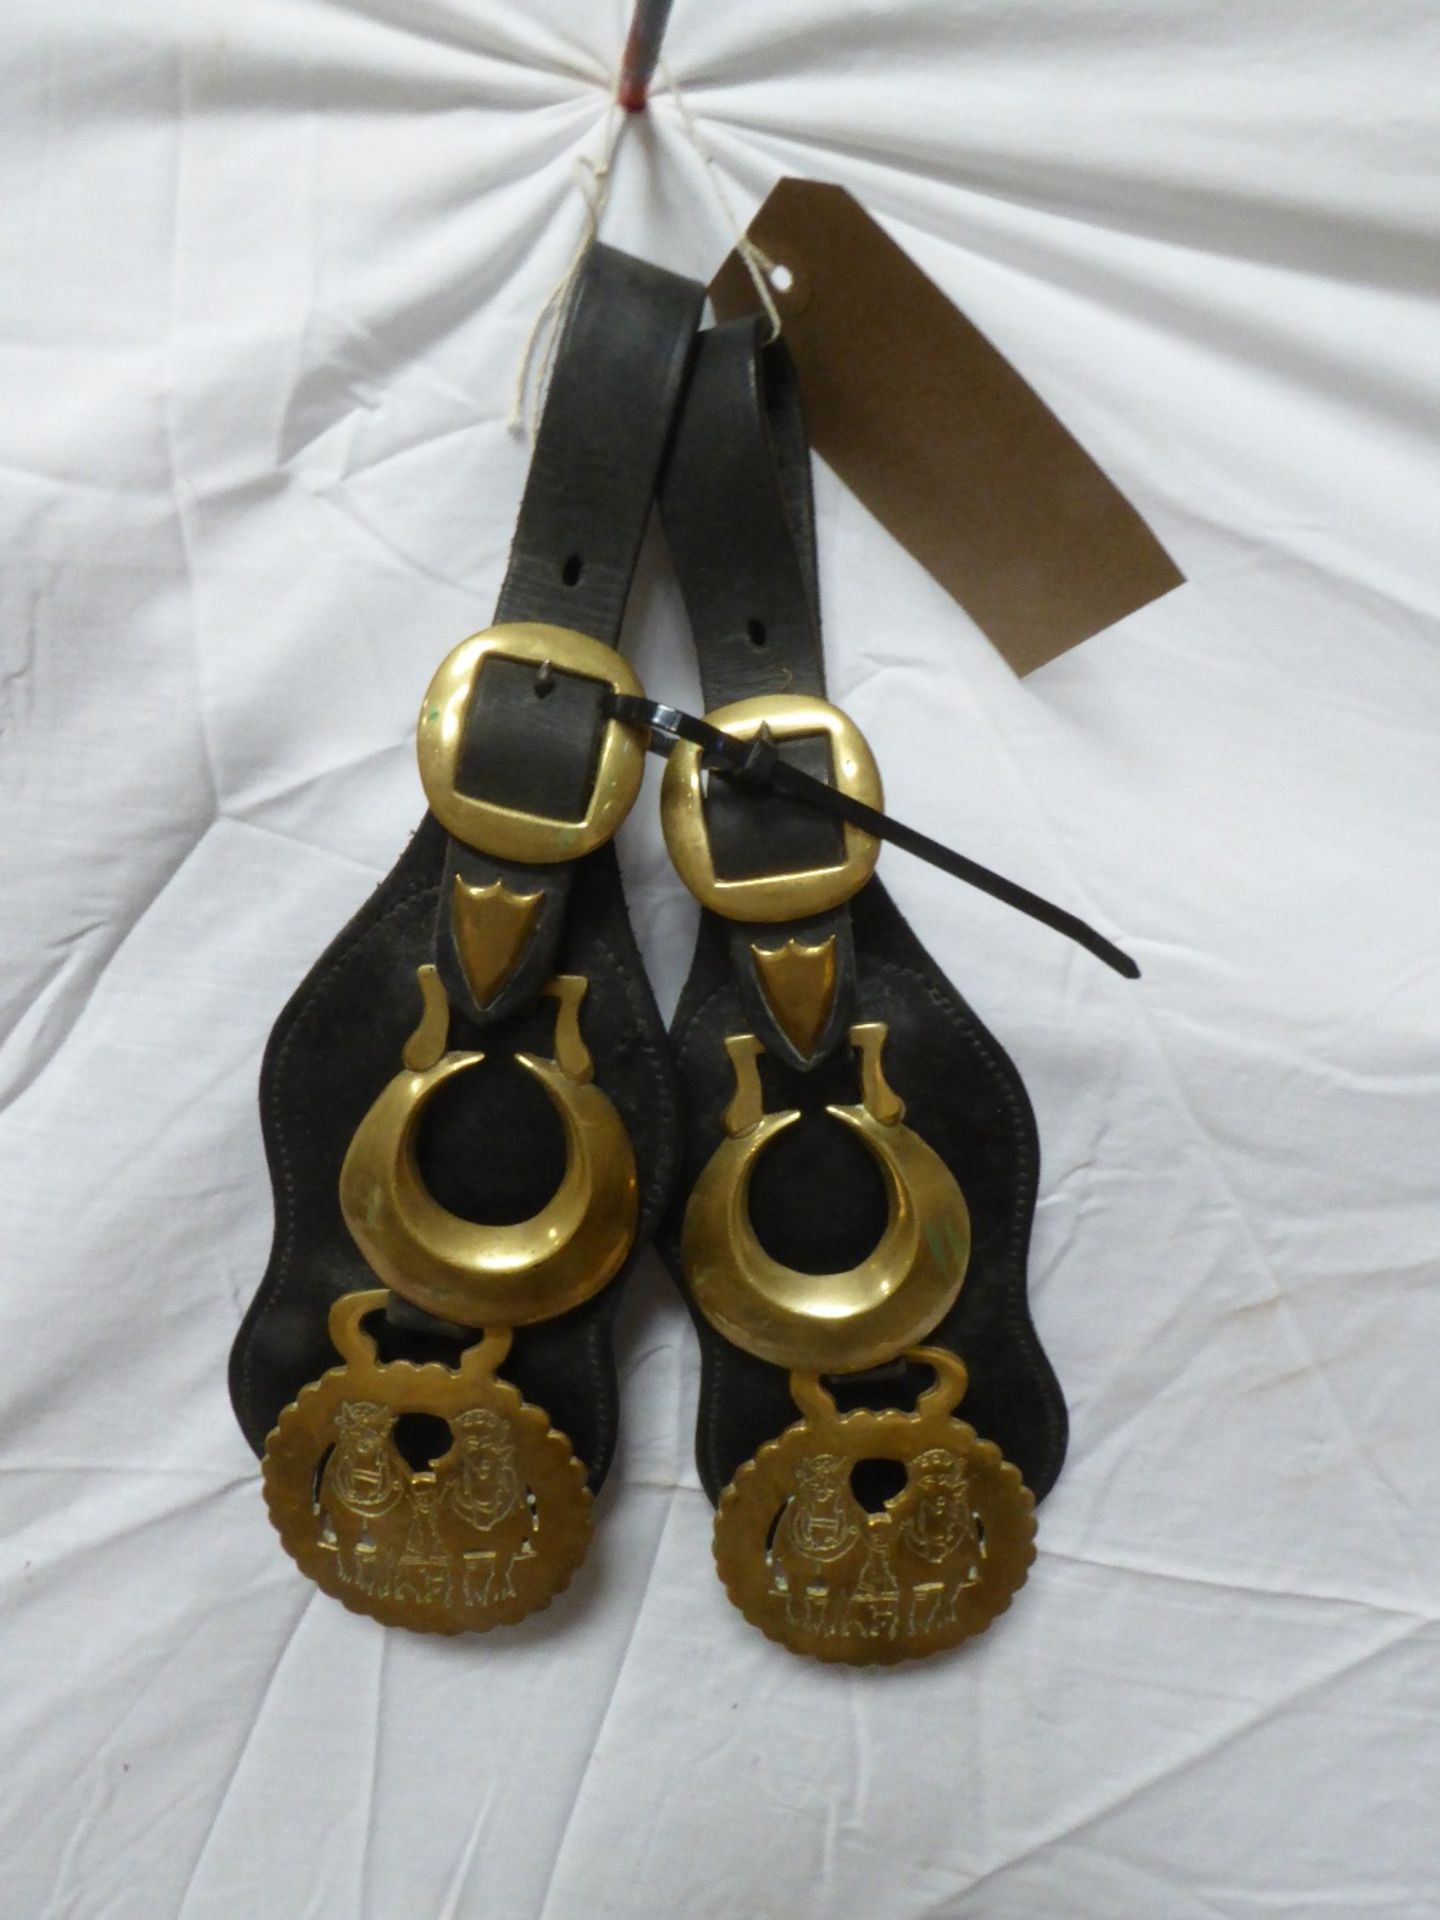 Pair of kidney straps each with two horse brasses